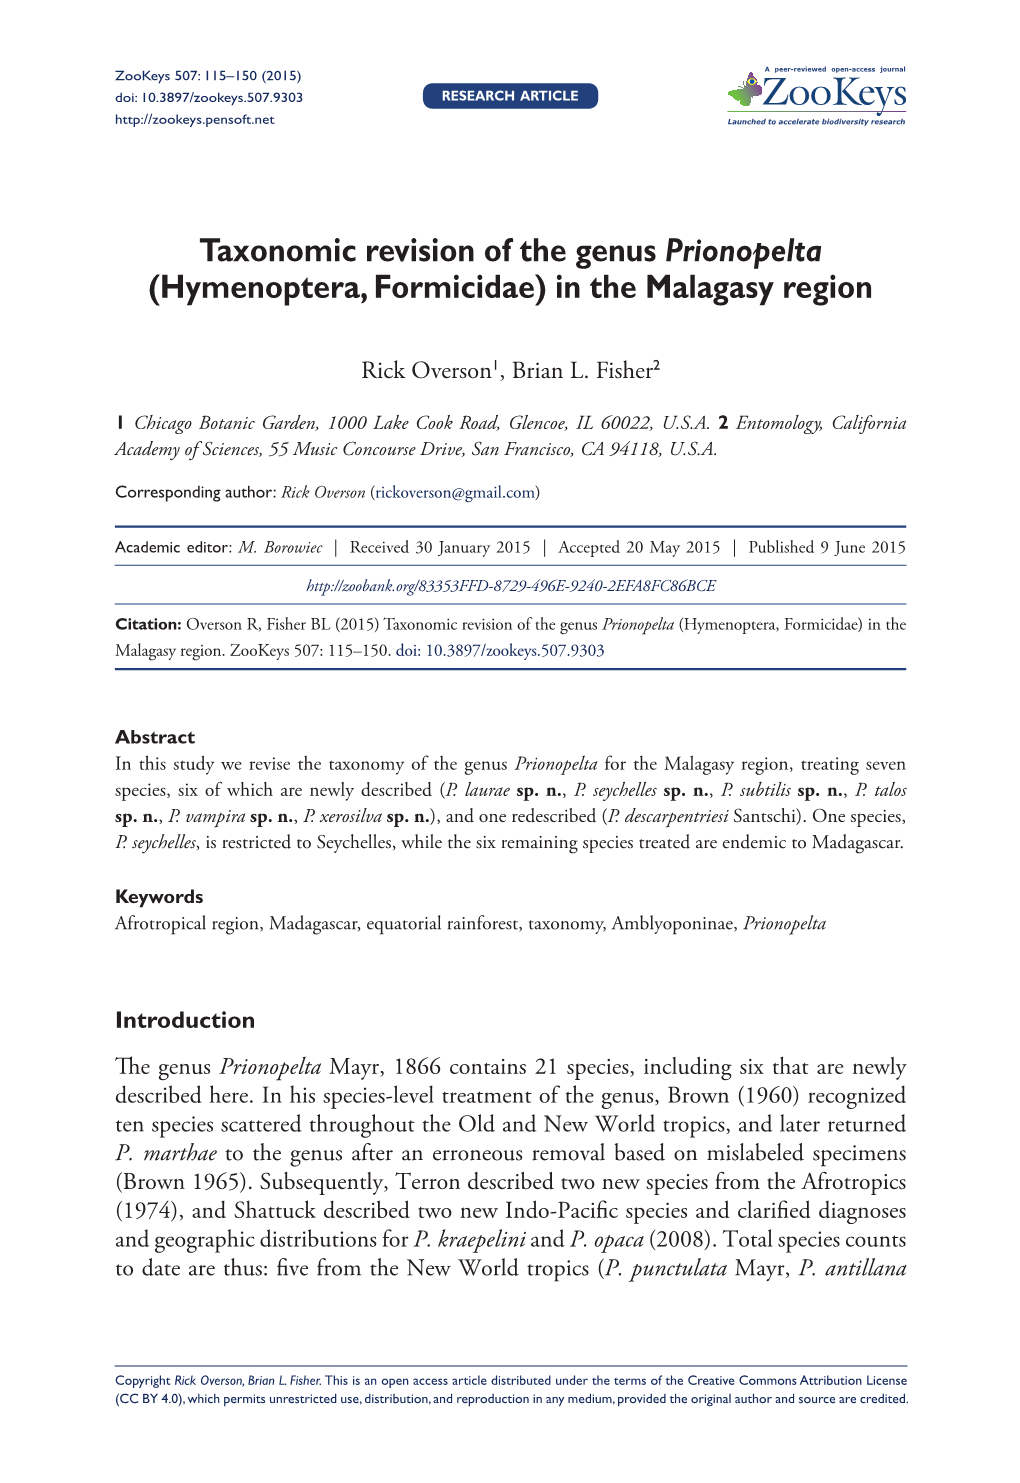 ﻿Taxonomic Revision of the Genus Prionopelta (Hymenoptera